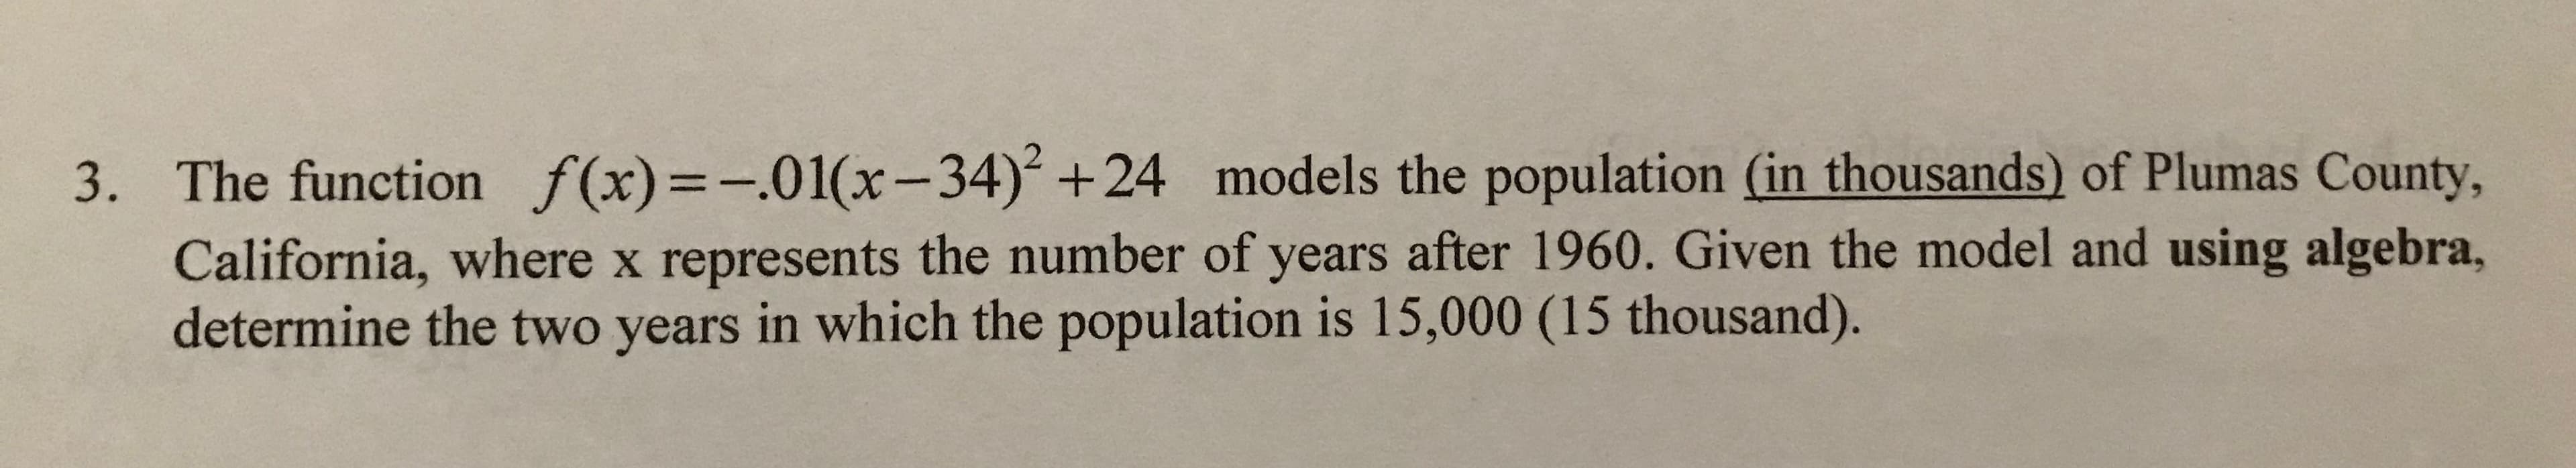 The function f(x)=-.01(x-34) +24 models the population (in thousands) of Plumas County,
3.
California, where x represents the number of years after 1960. Given the model and using algebra,
determine the two years in which the population is 15,000 (15 thousand).
